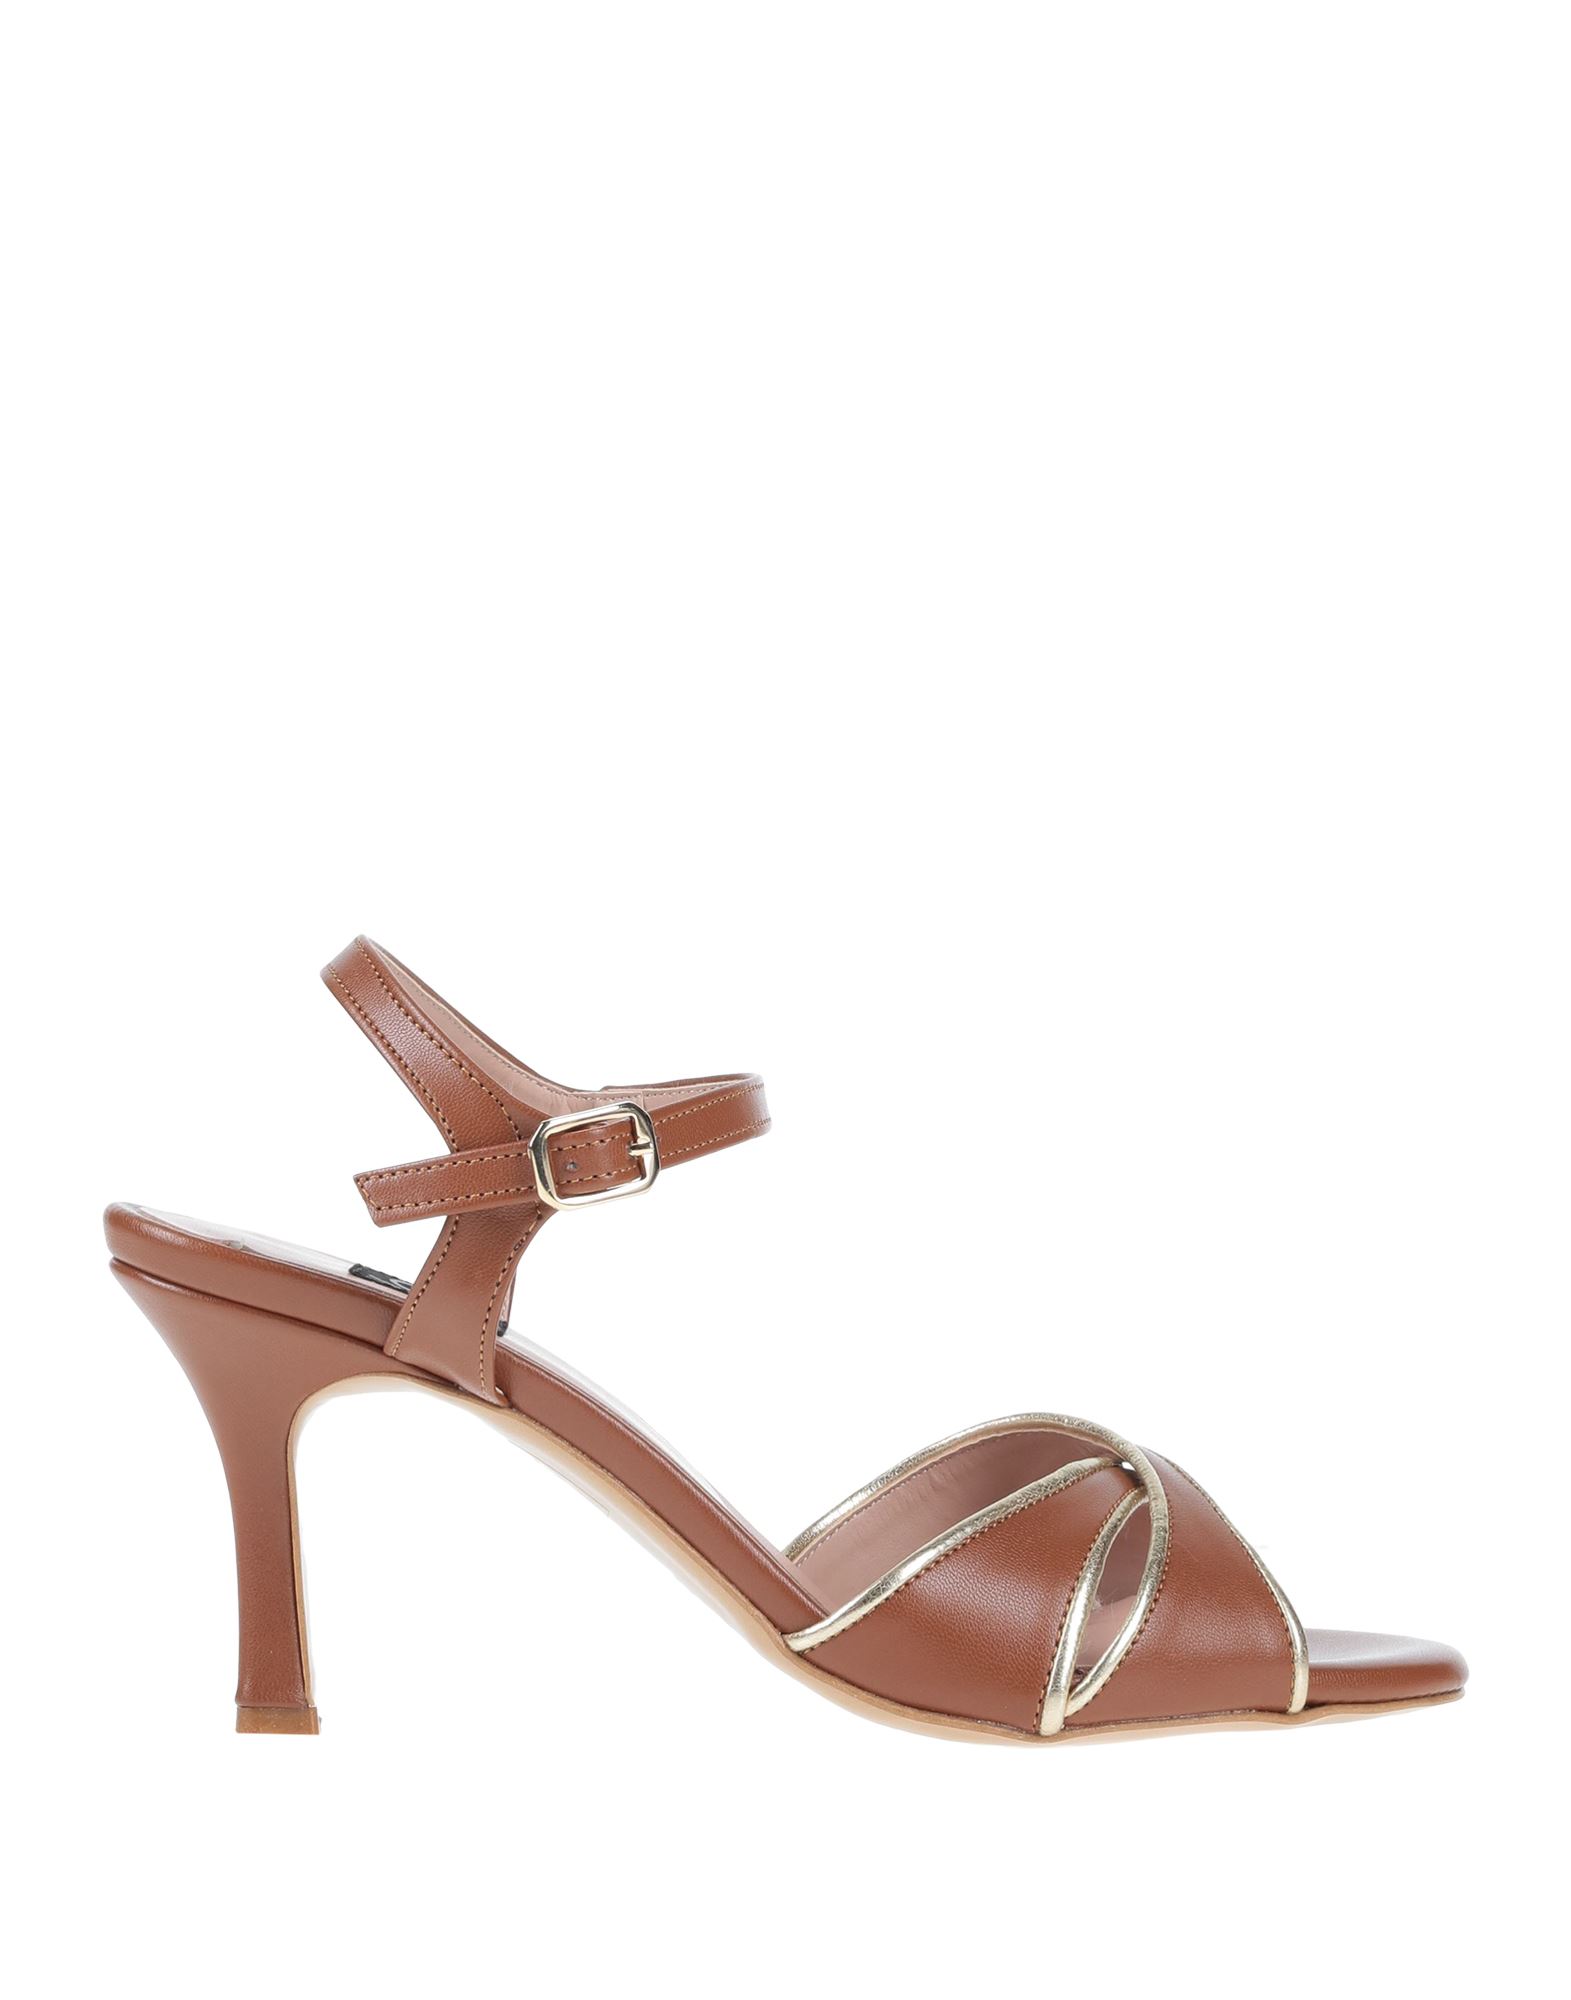 Islo Isabella Lorusso Sandals In Brown